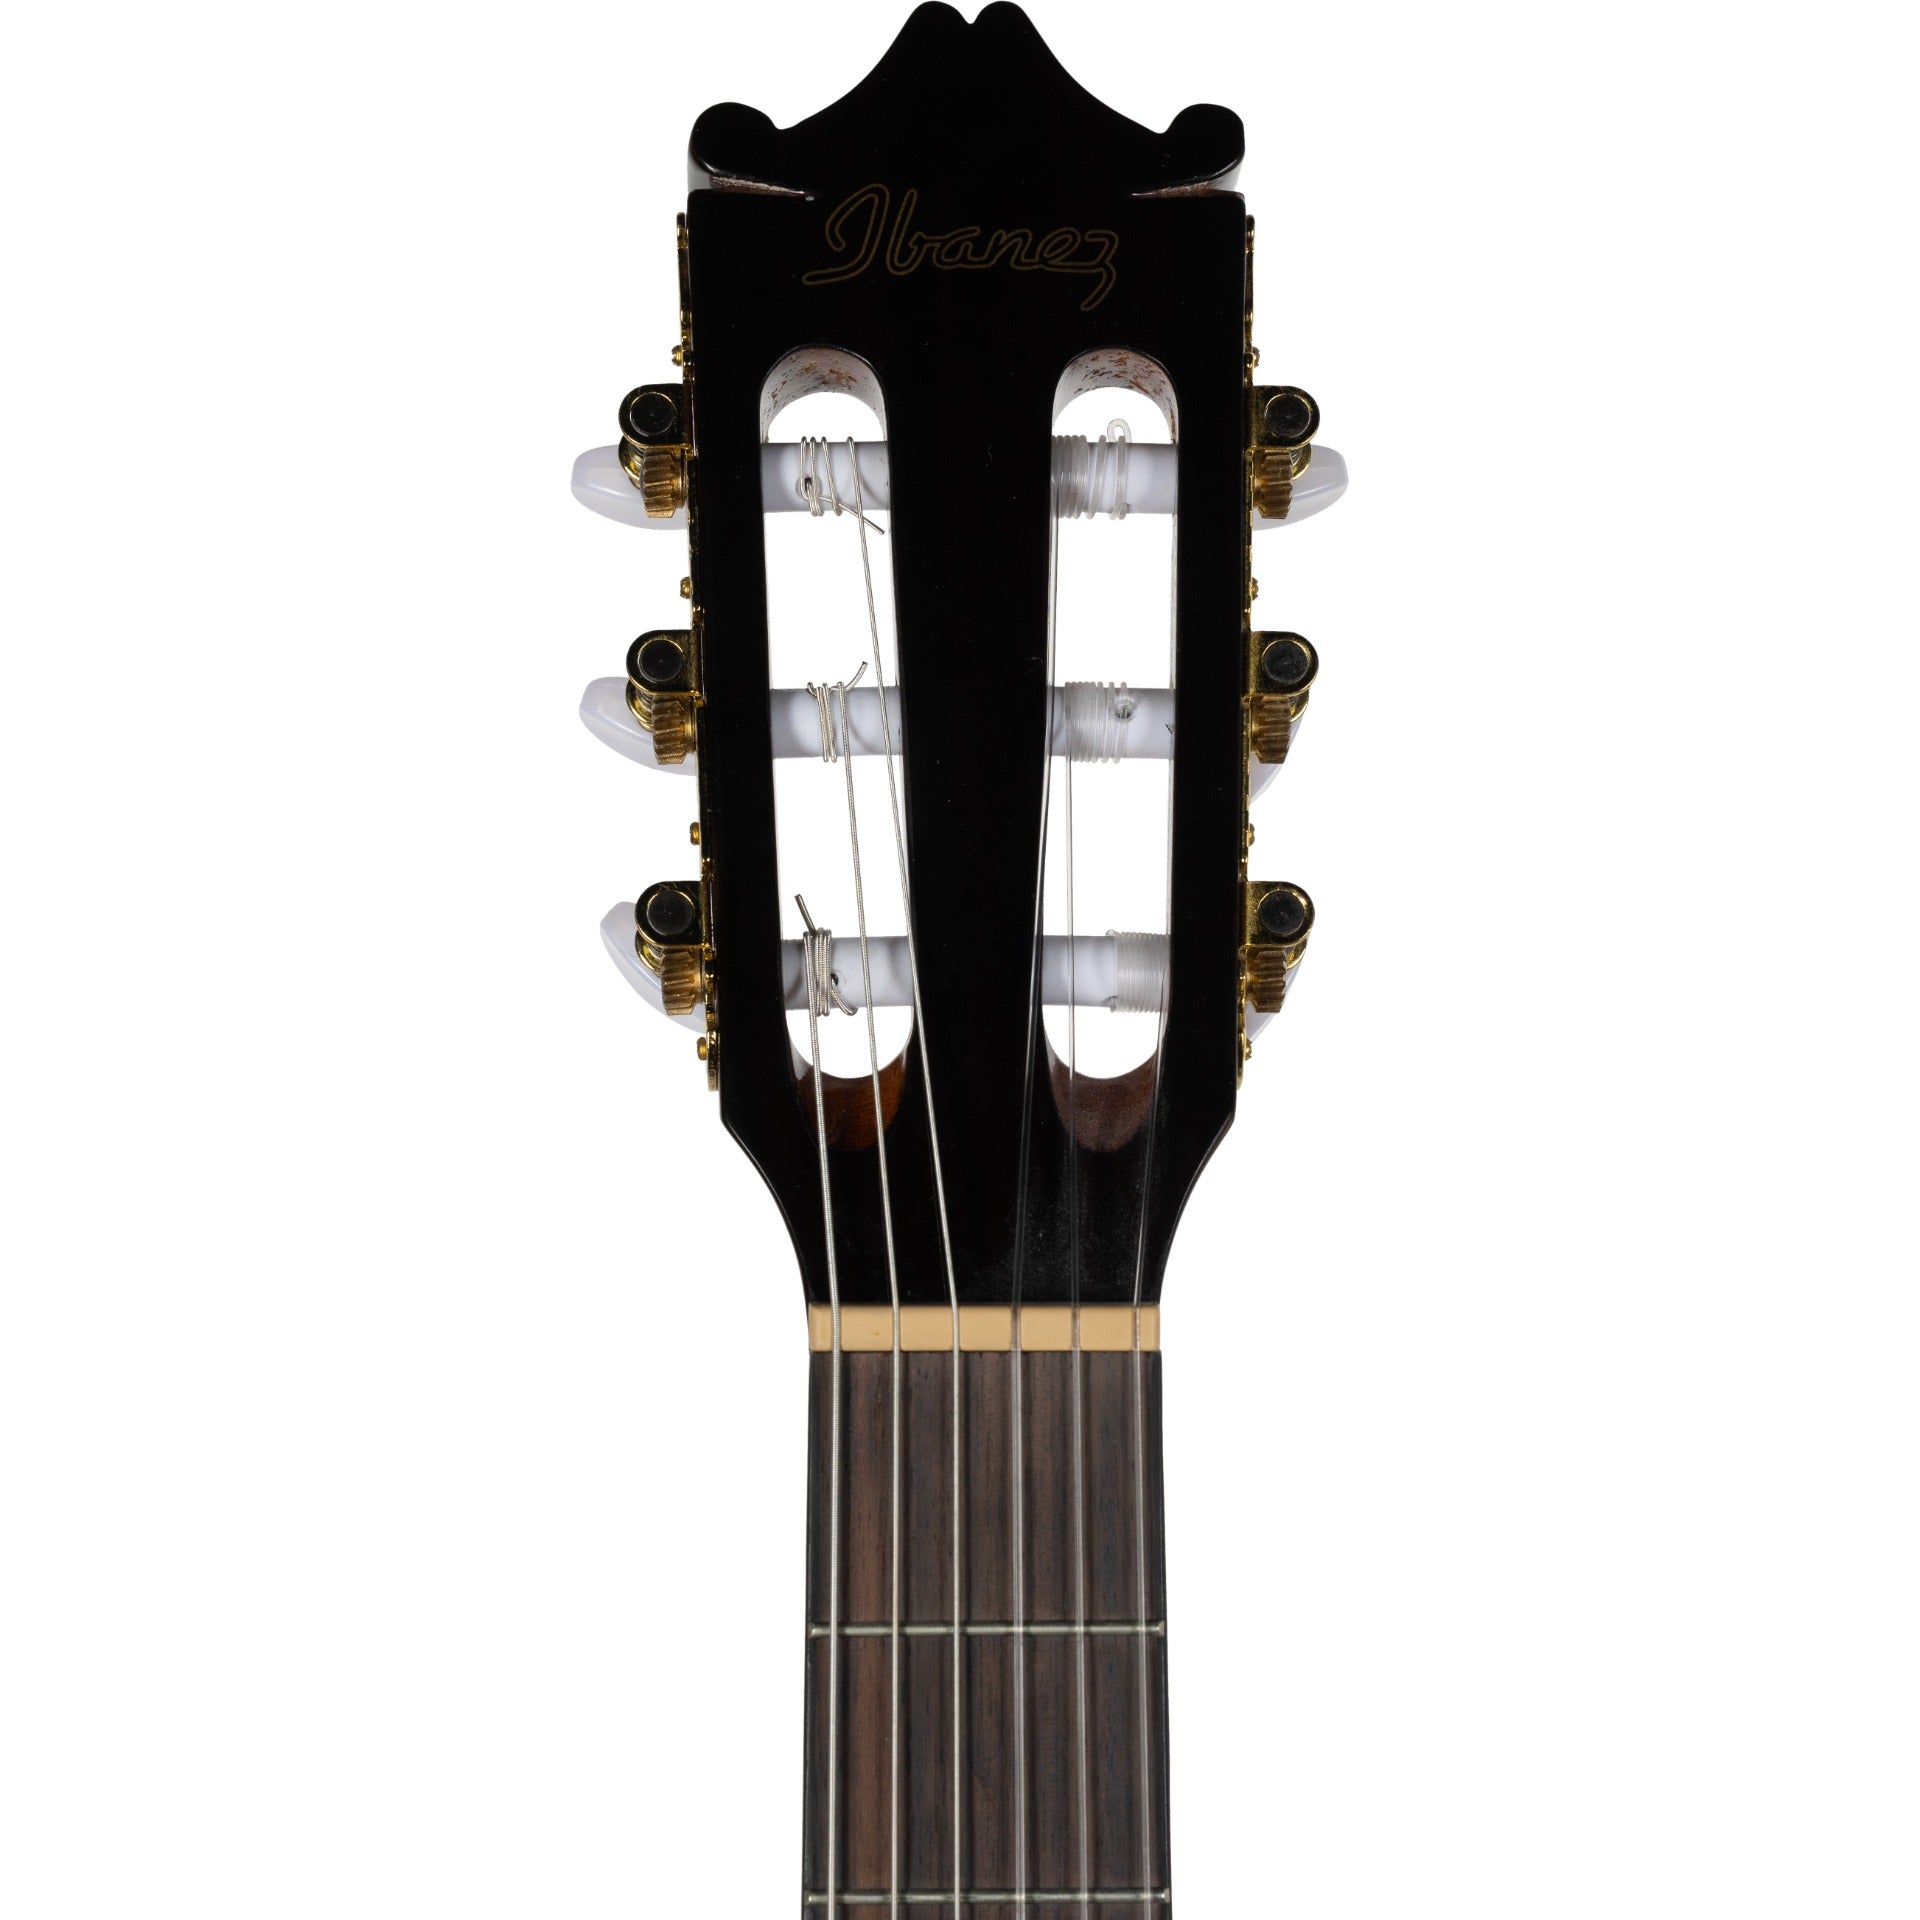 Ibanez GA5TCE Classical Acoustic-Electric Guitar